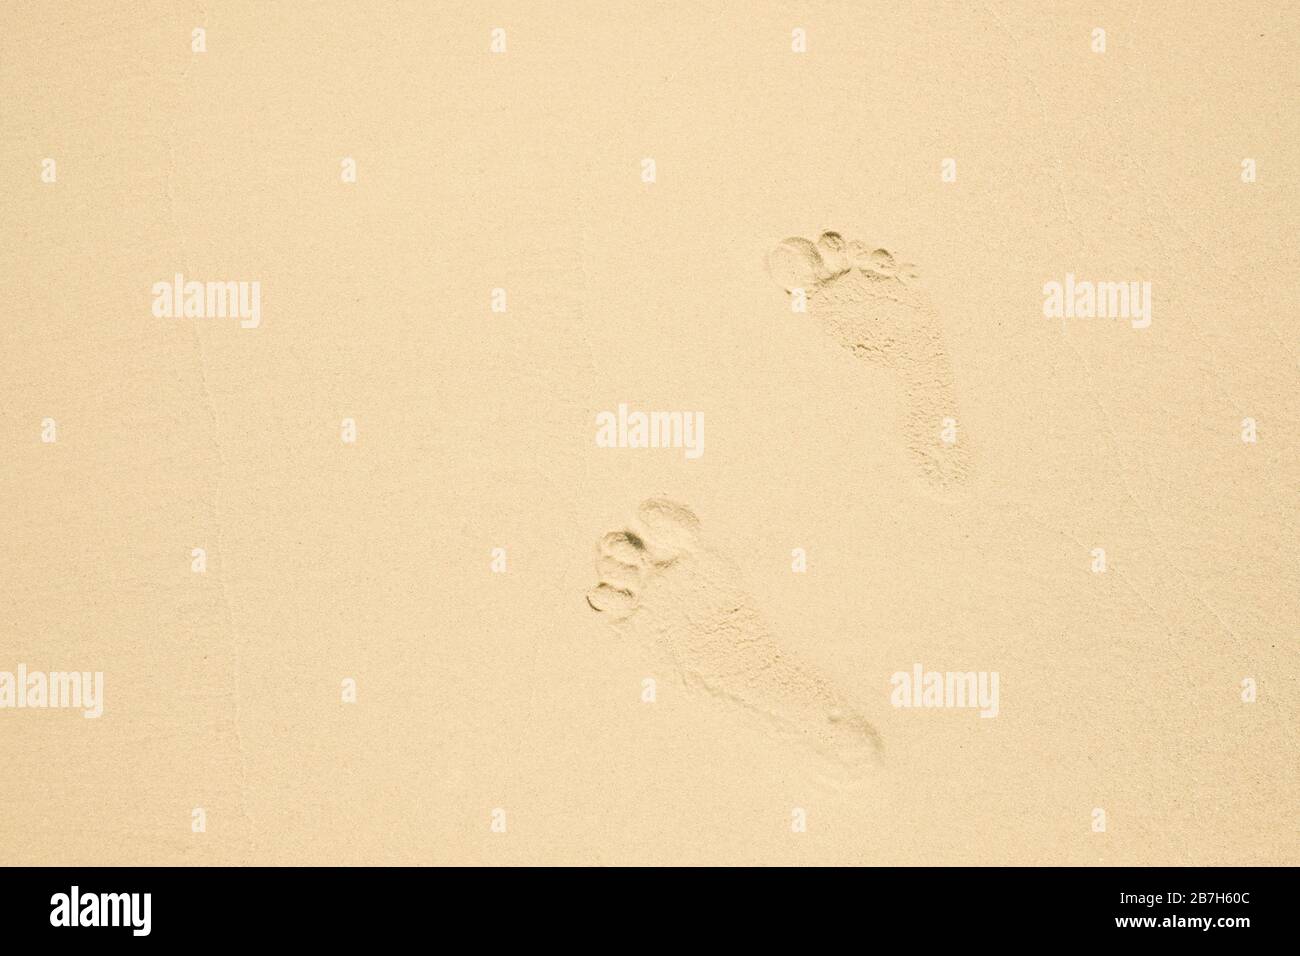 Footprints of a man walking on the sand beach. Stock Photo